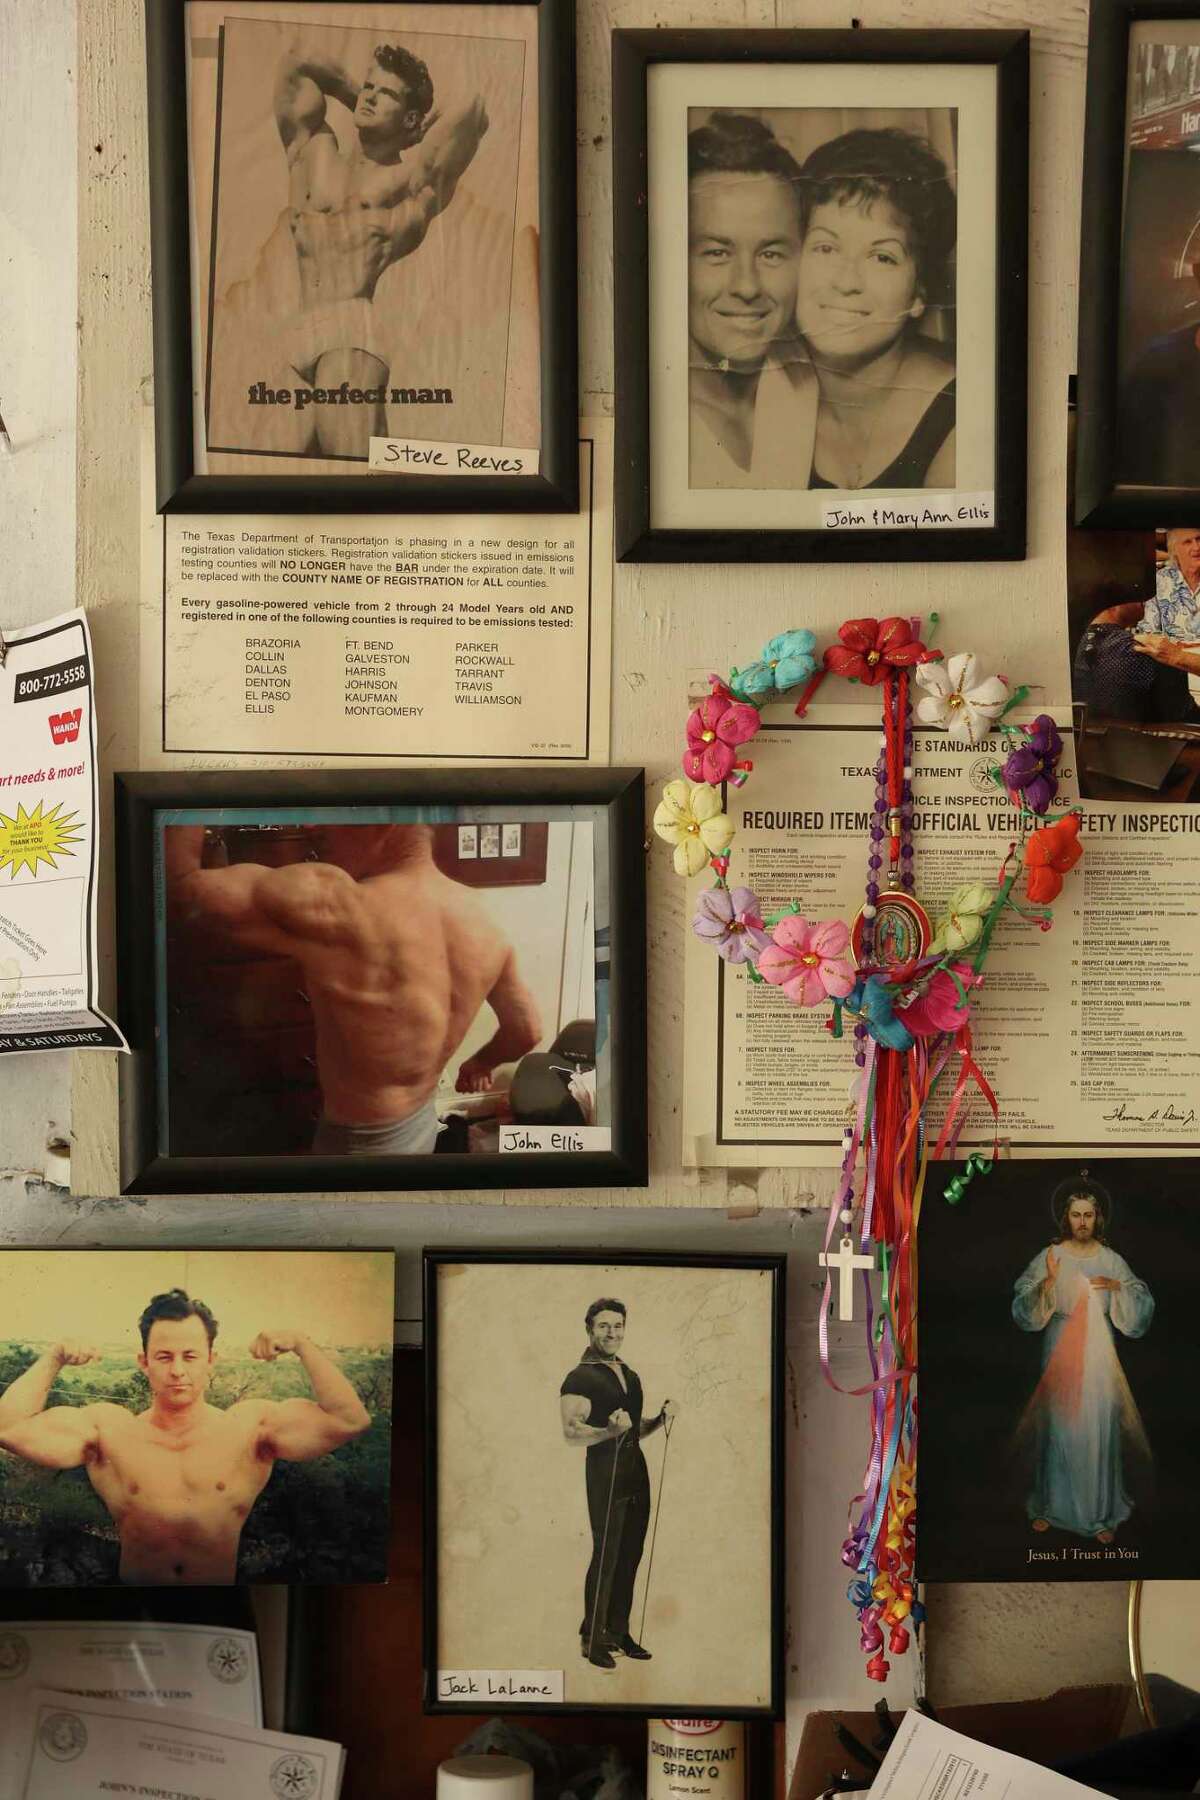 On a wall at John's Inspection are photos of John Ellis and his late wife, Mary Ann, top right, and John as a young man bowing, bottom left.  Ellis, 85, has been a bodybuilder for most of his life and is currently working on opening a gym in the back room of his auto inspection business in South Flores.